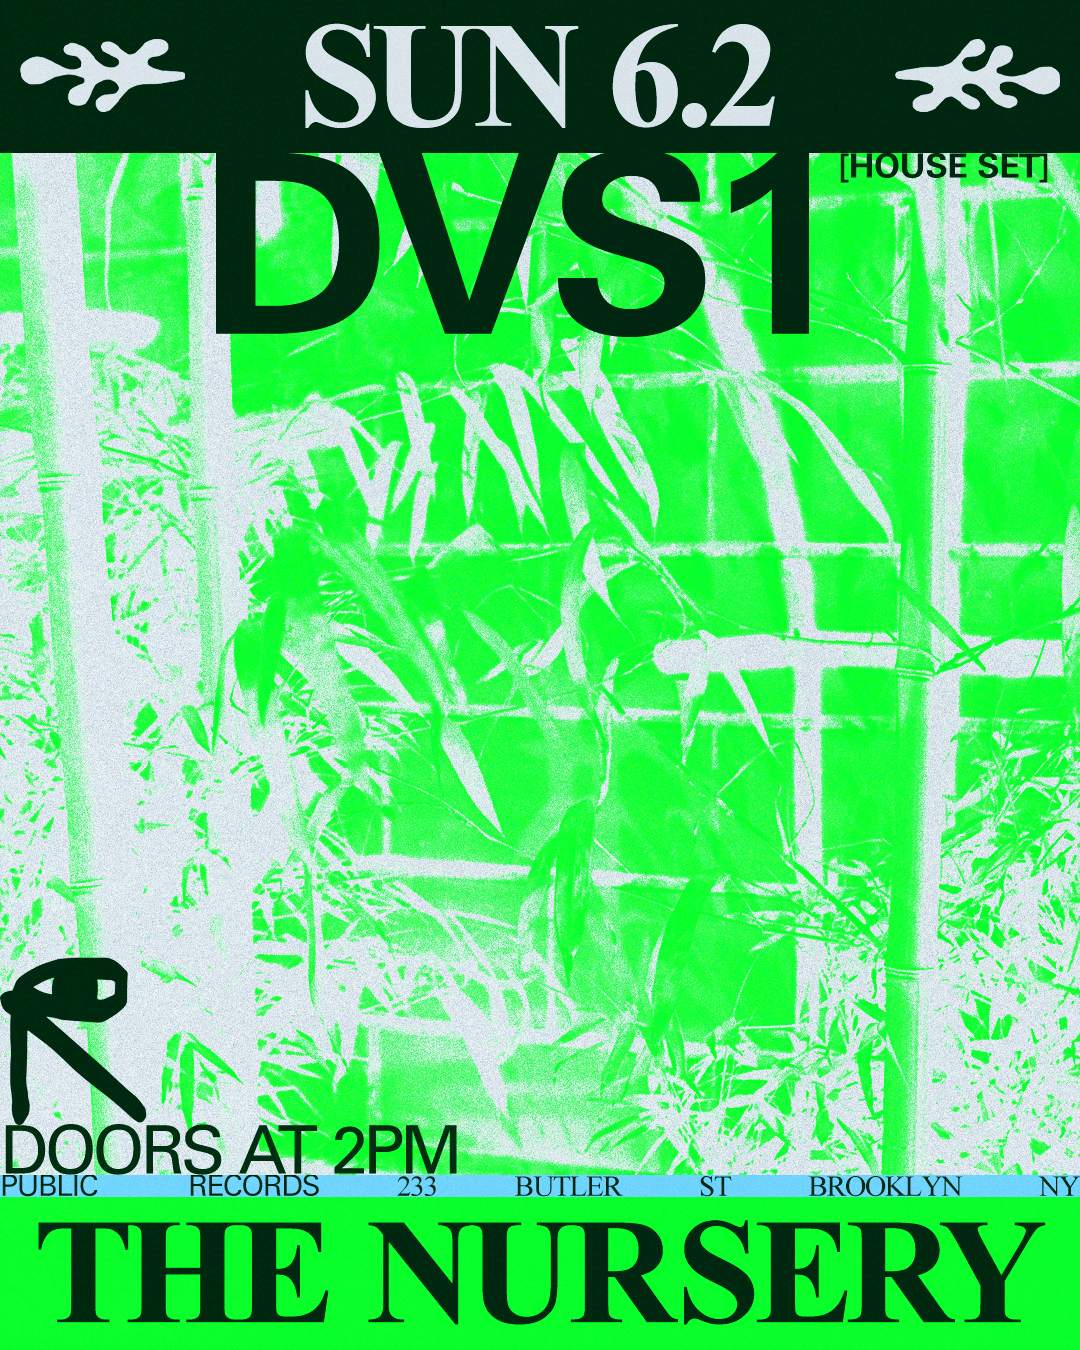 DVS1 open to close (house set) in The Nursery - フライヤー表